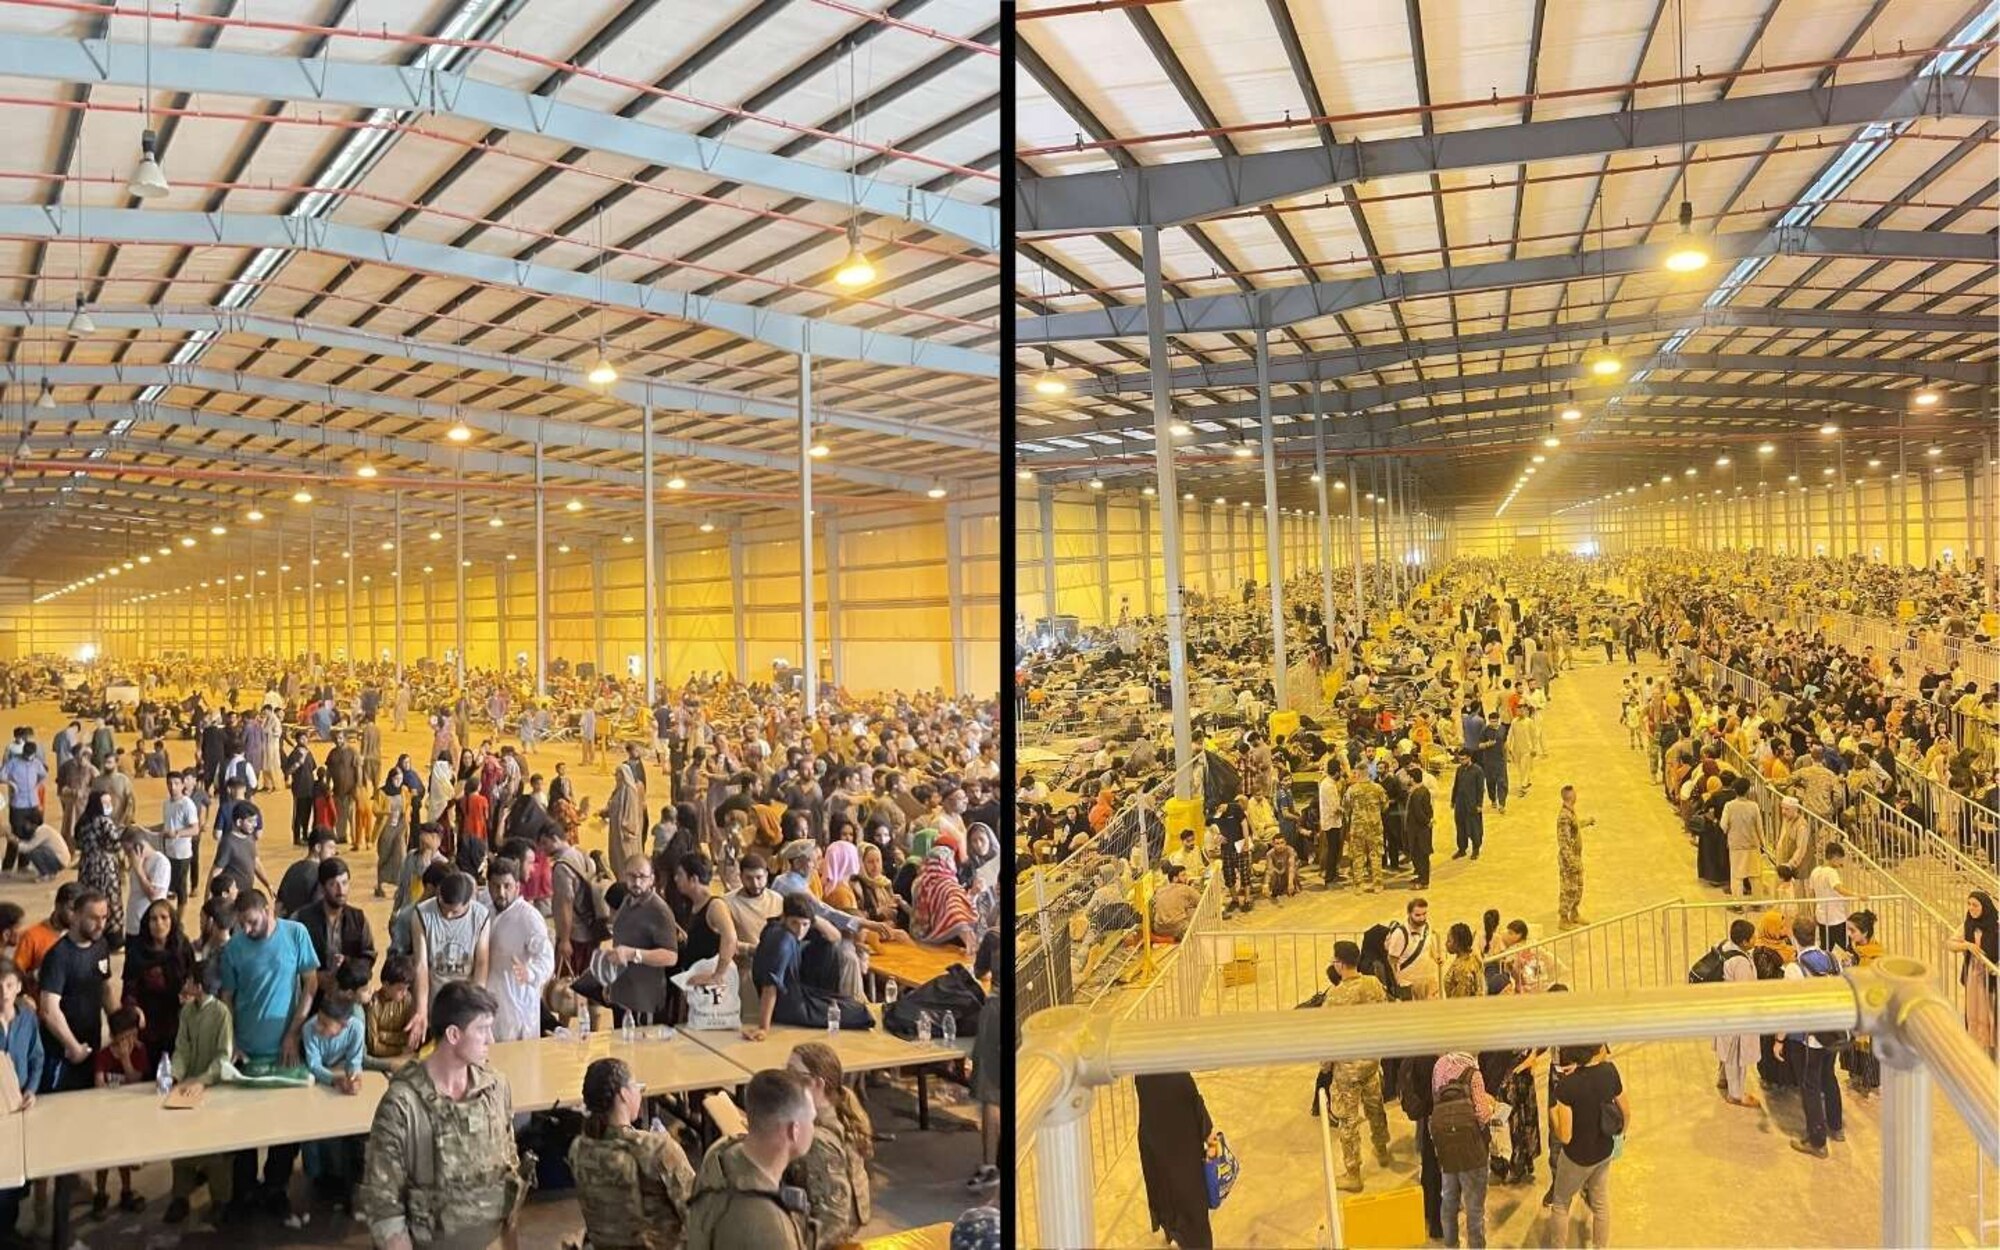 A graphic showcasing when U.S. Air Force Senior Master Sgt. Byron Ball, 97th Civil Engineer Squadron deputy fire chief, first arrived (right) at Al Udeid Air Base, Qatar, and during his time there (left). During his support Operation Allies Refuge, Ball led the daily operations of the largest operating location by directing 200 personnel with the arrival, screening, housing, feeding and clothing of 10,000 total evacuees and reunited 145 refugee families. (U.S. Air Force graphic by Airman 1st Class Trenton Jancze)